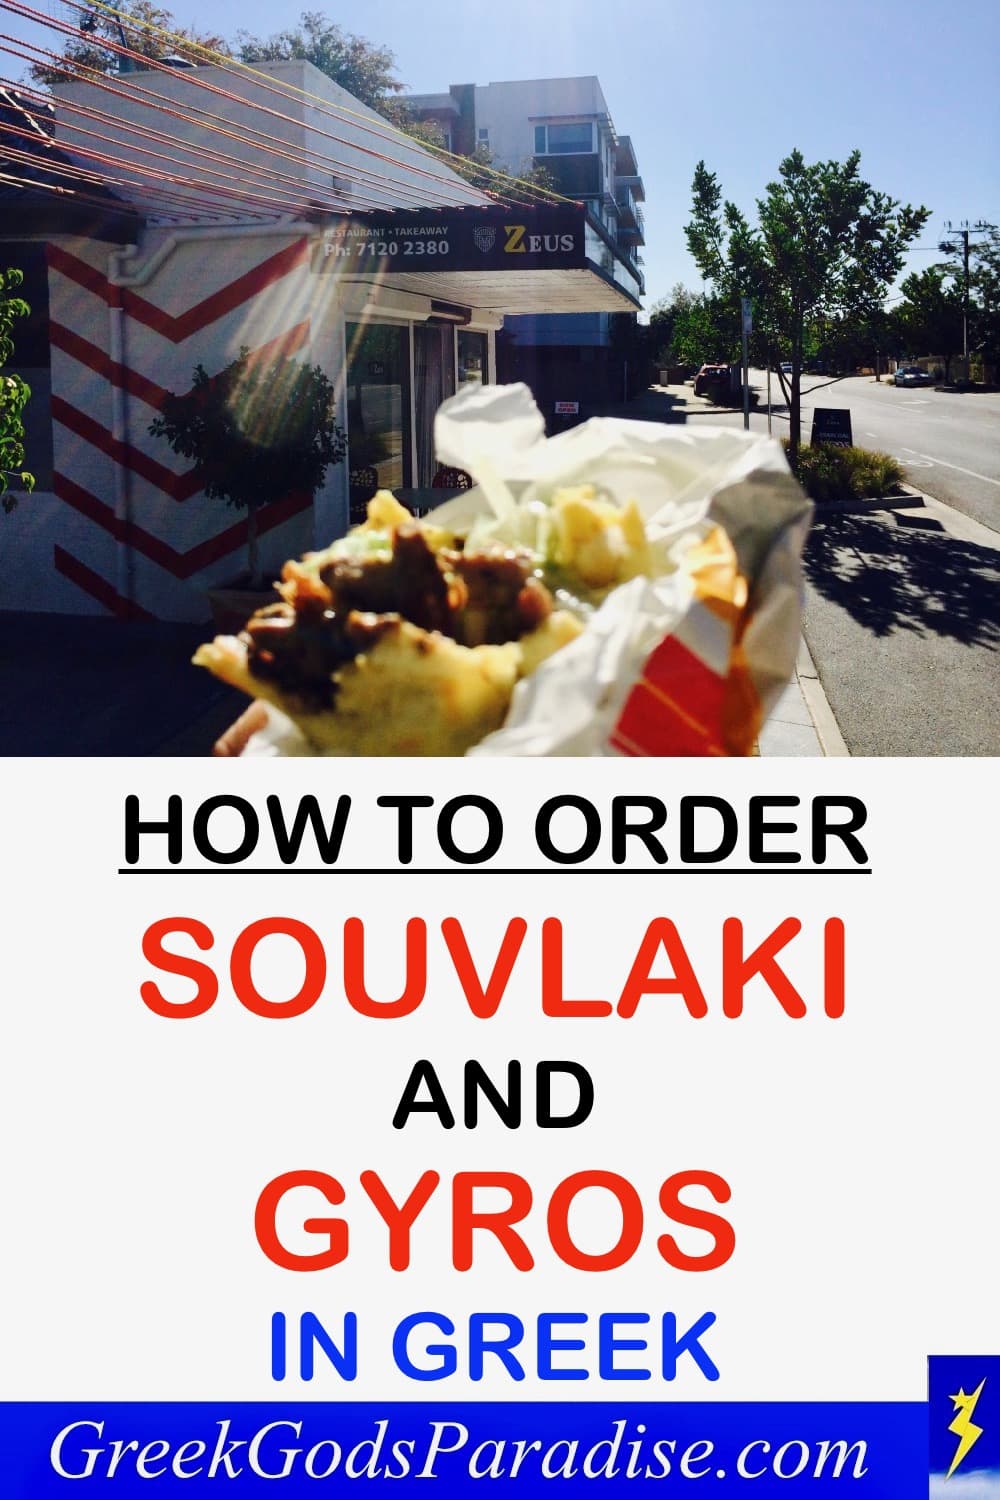 How to order souvlaki and gyros in Greek